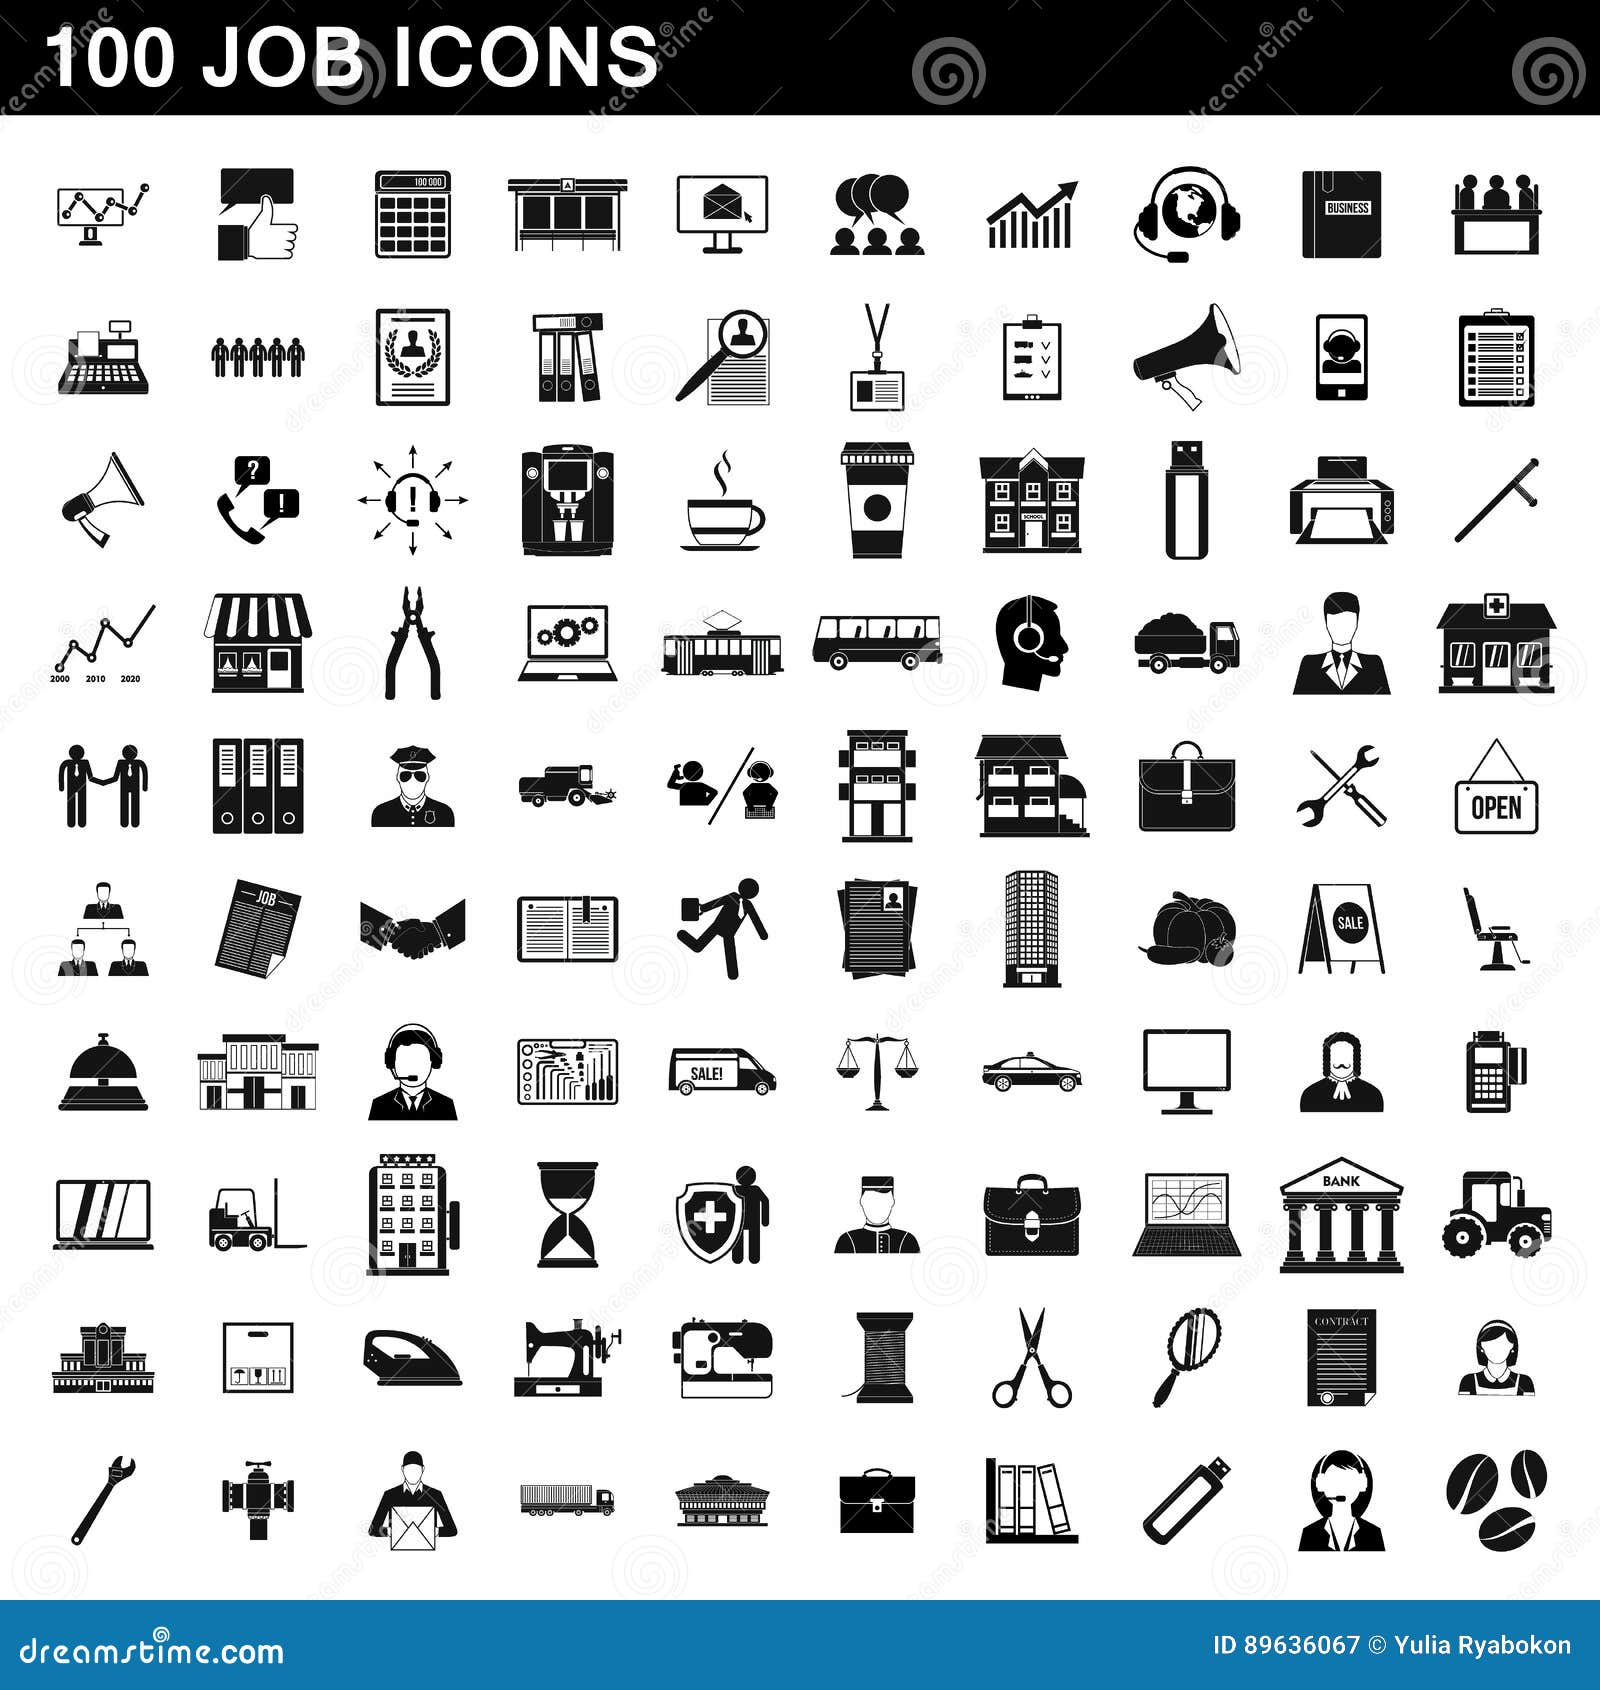 100,000 Aa logo Vector Images